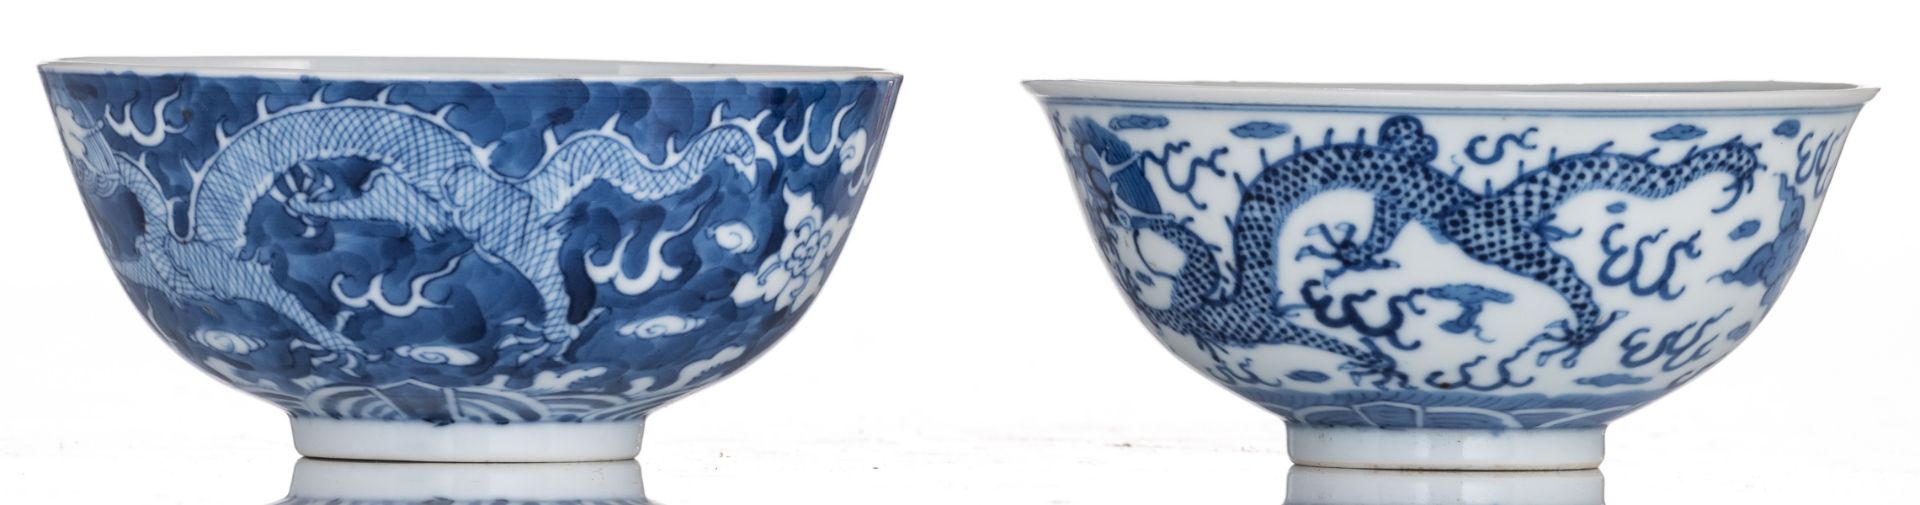 Two Chinese blue and white dragon decorated bowls, with a Kangxi mark, H 5,5 - 6 - ø 12,5 - 13 cm - Image 3 of 7